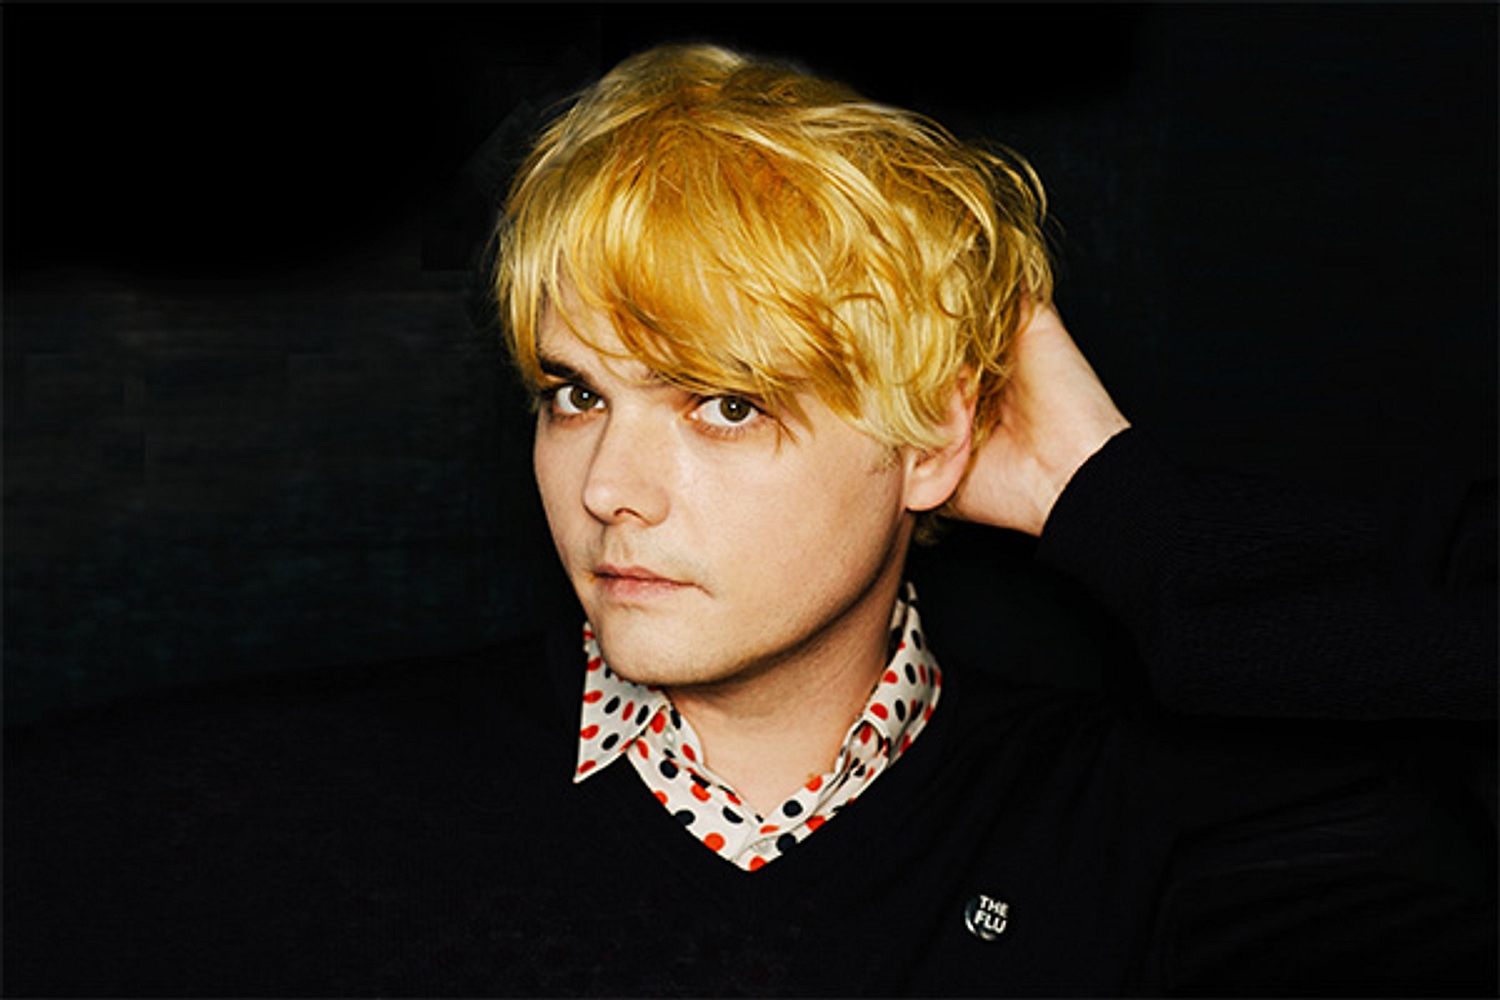 Gerard Way on new single: “I just wanted a song called ‘Action Cat’”